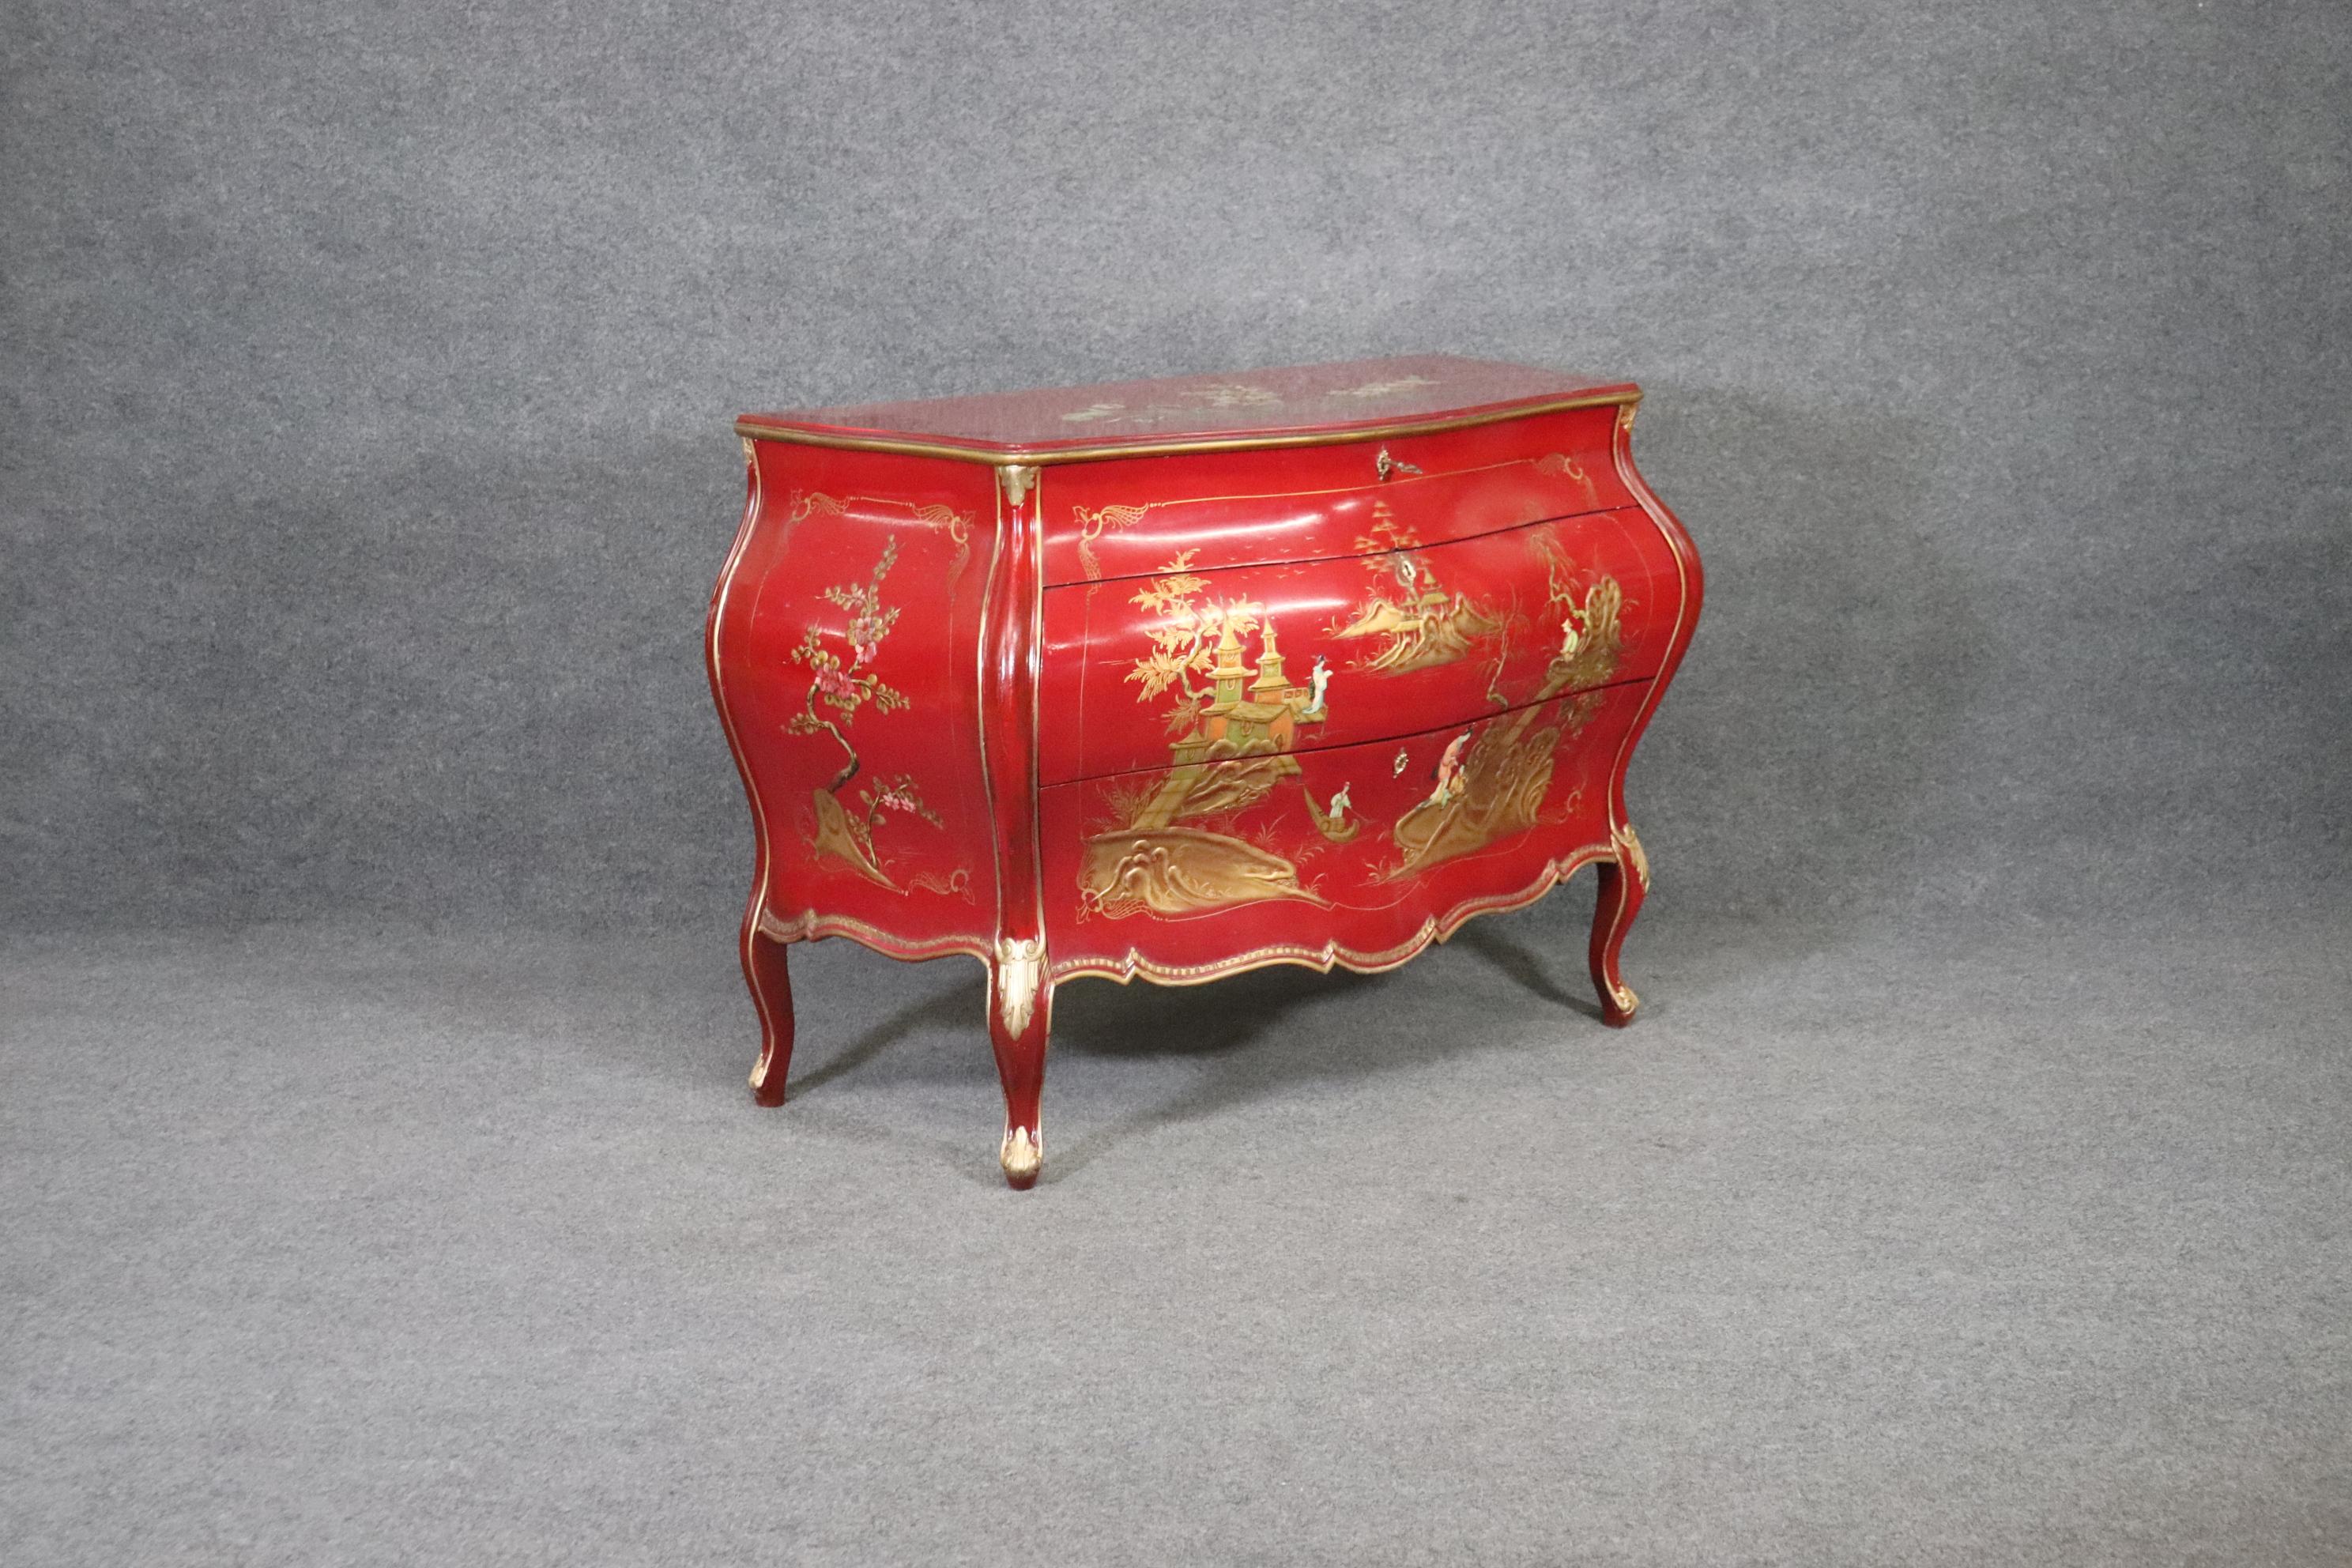 This Chinoiserie red French Louis XVI Style hand painted bombe commode chest of drawers, antique dresser circa 1930 is a stunning and rare style of commode. The hand painted chinoiserie is in very good condition. The red color is very rare as most